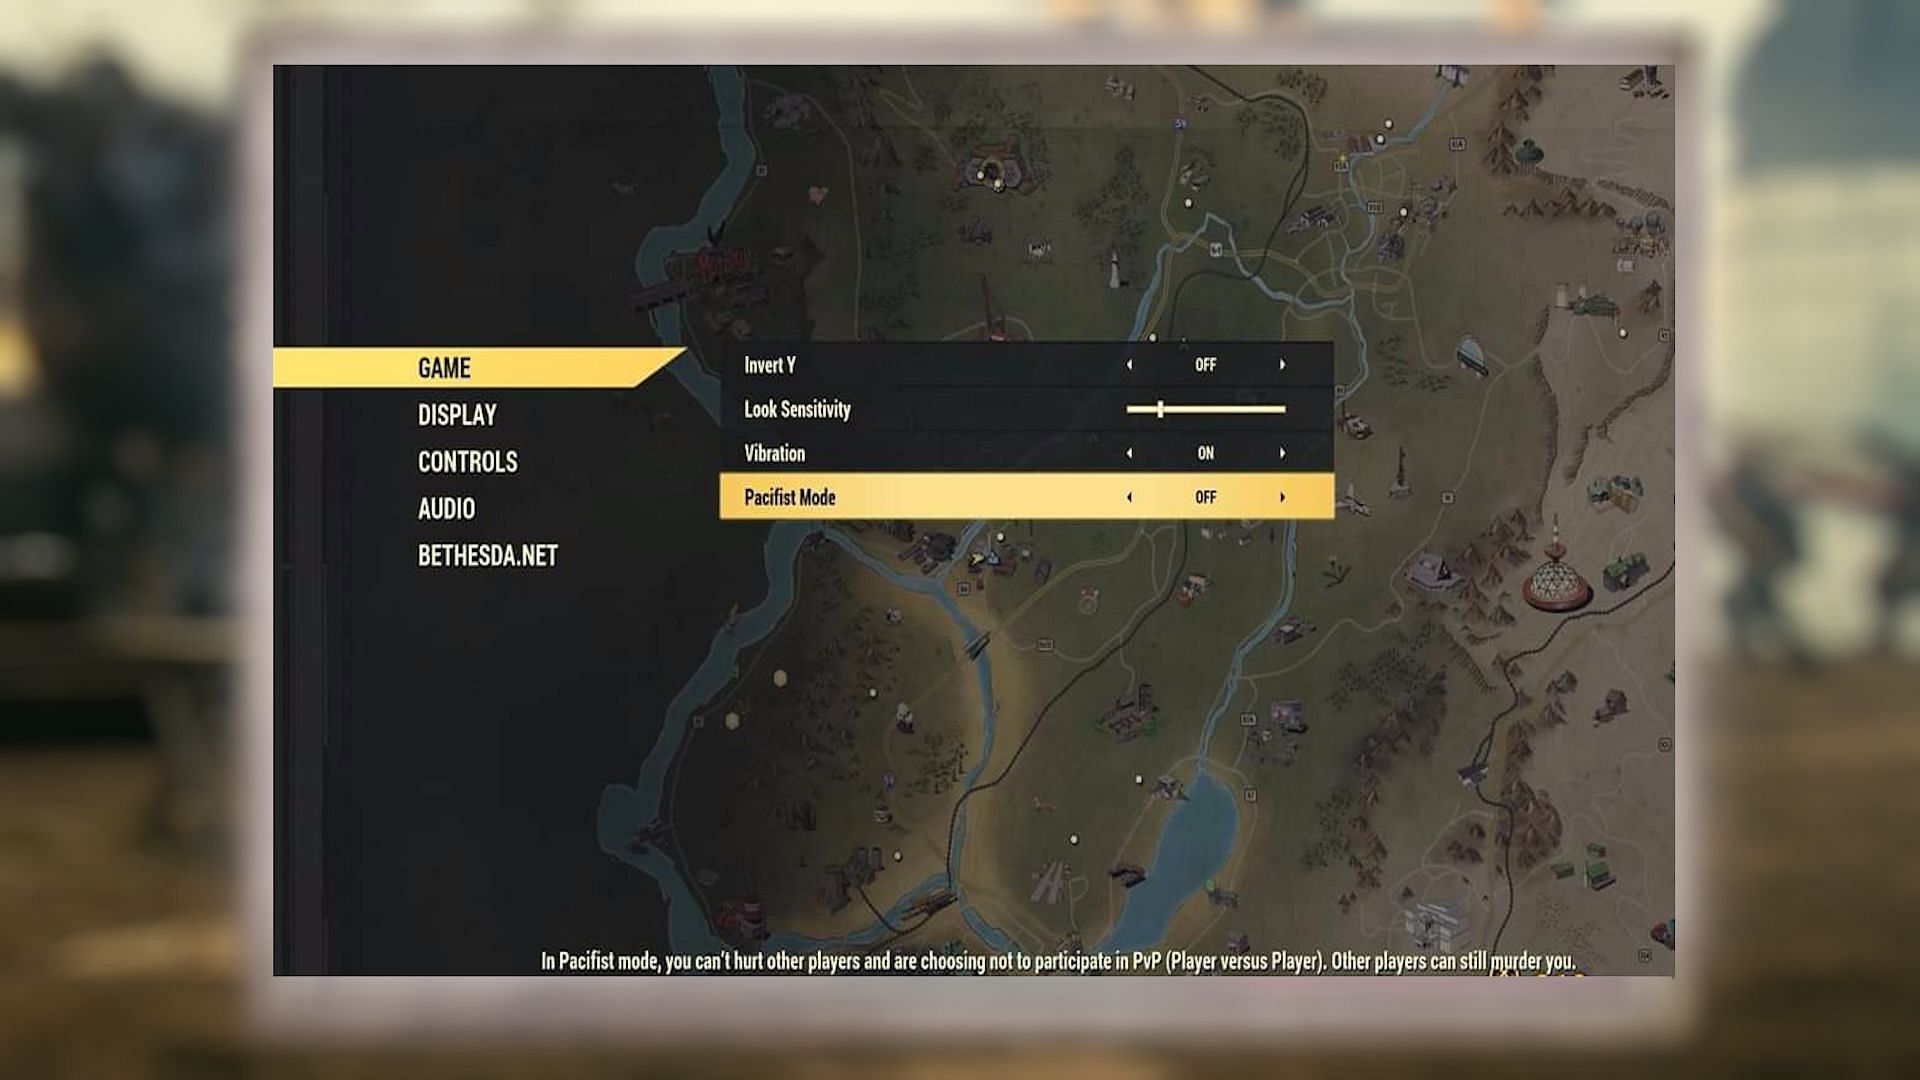 You can turn on Pacifist Mode in the Game settings. (Image via Bethesda Game Studios)